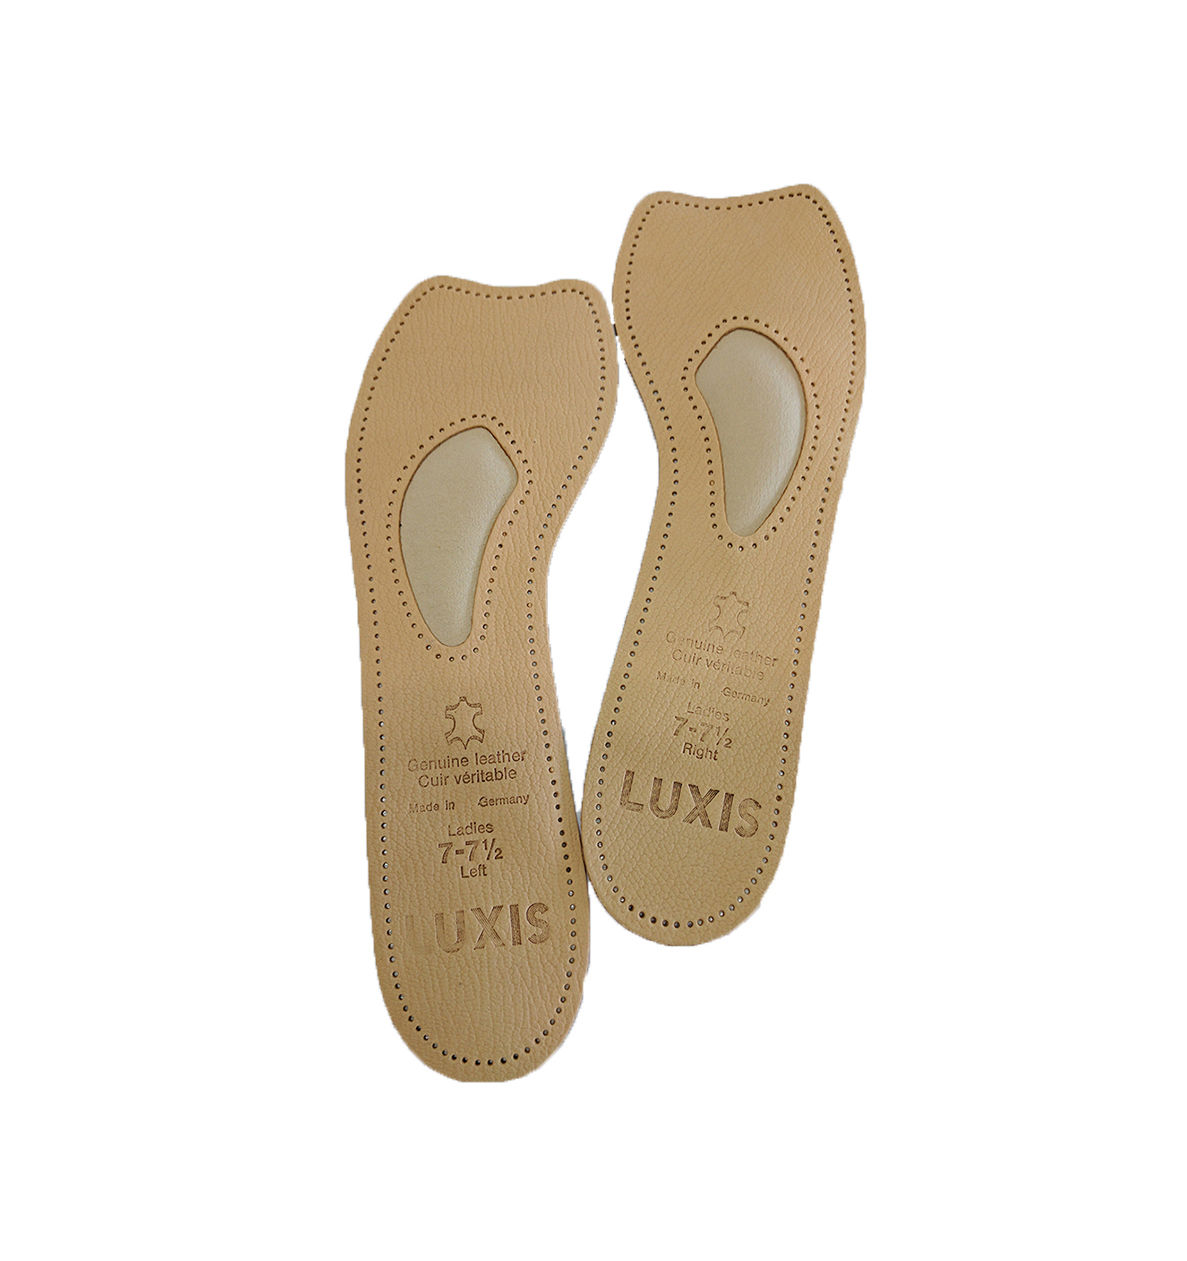 Luxis Insoles - Add comfort to all your 